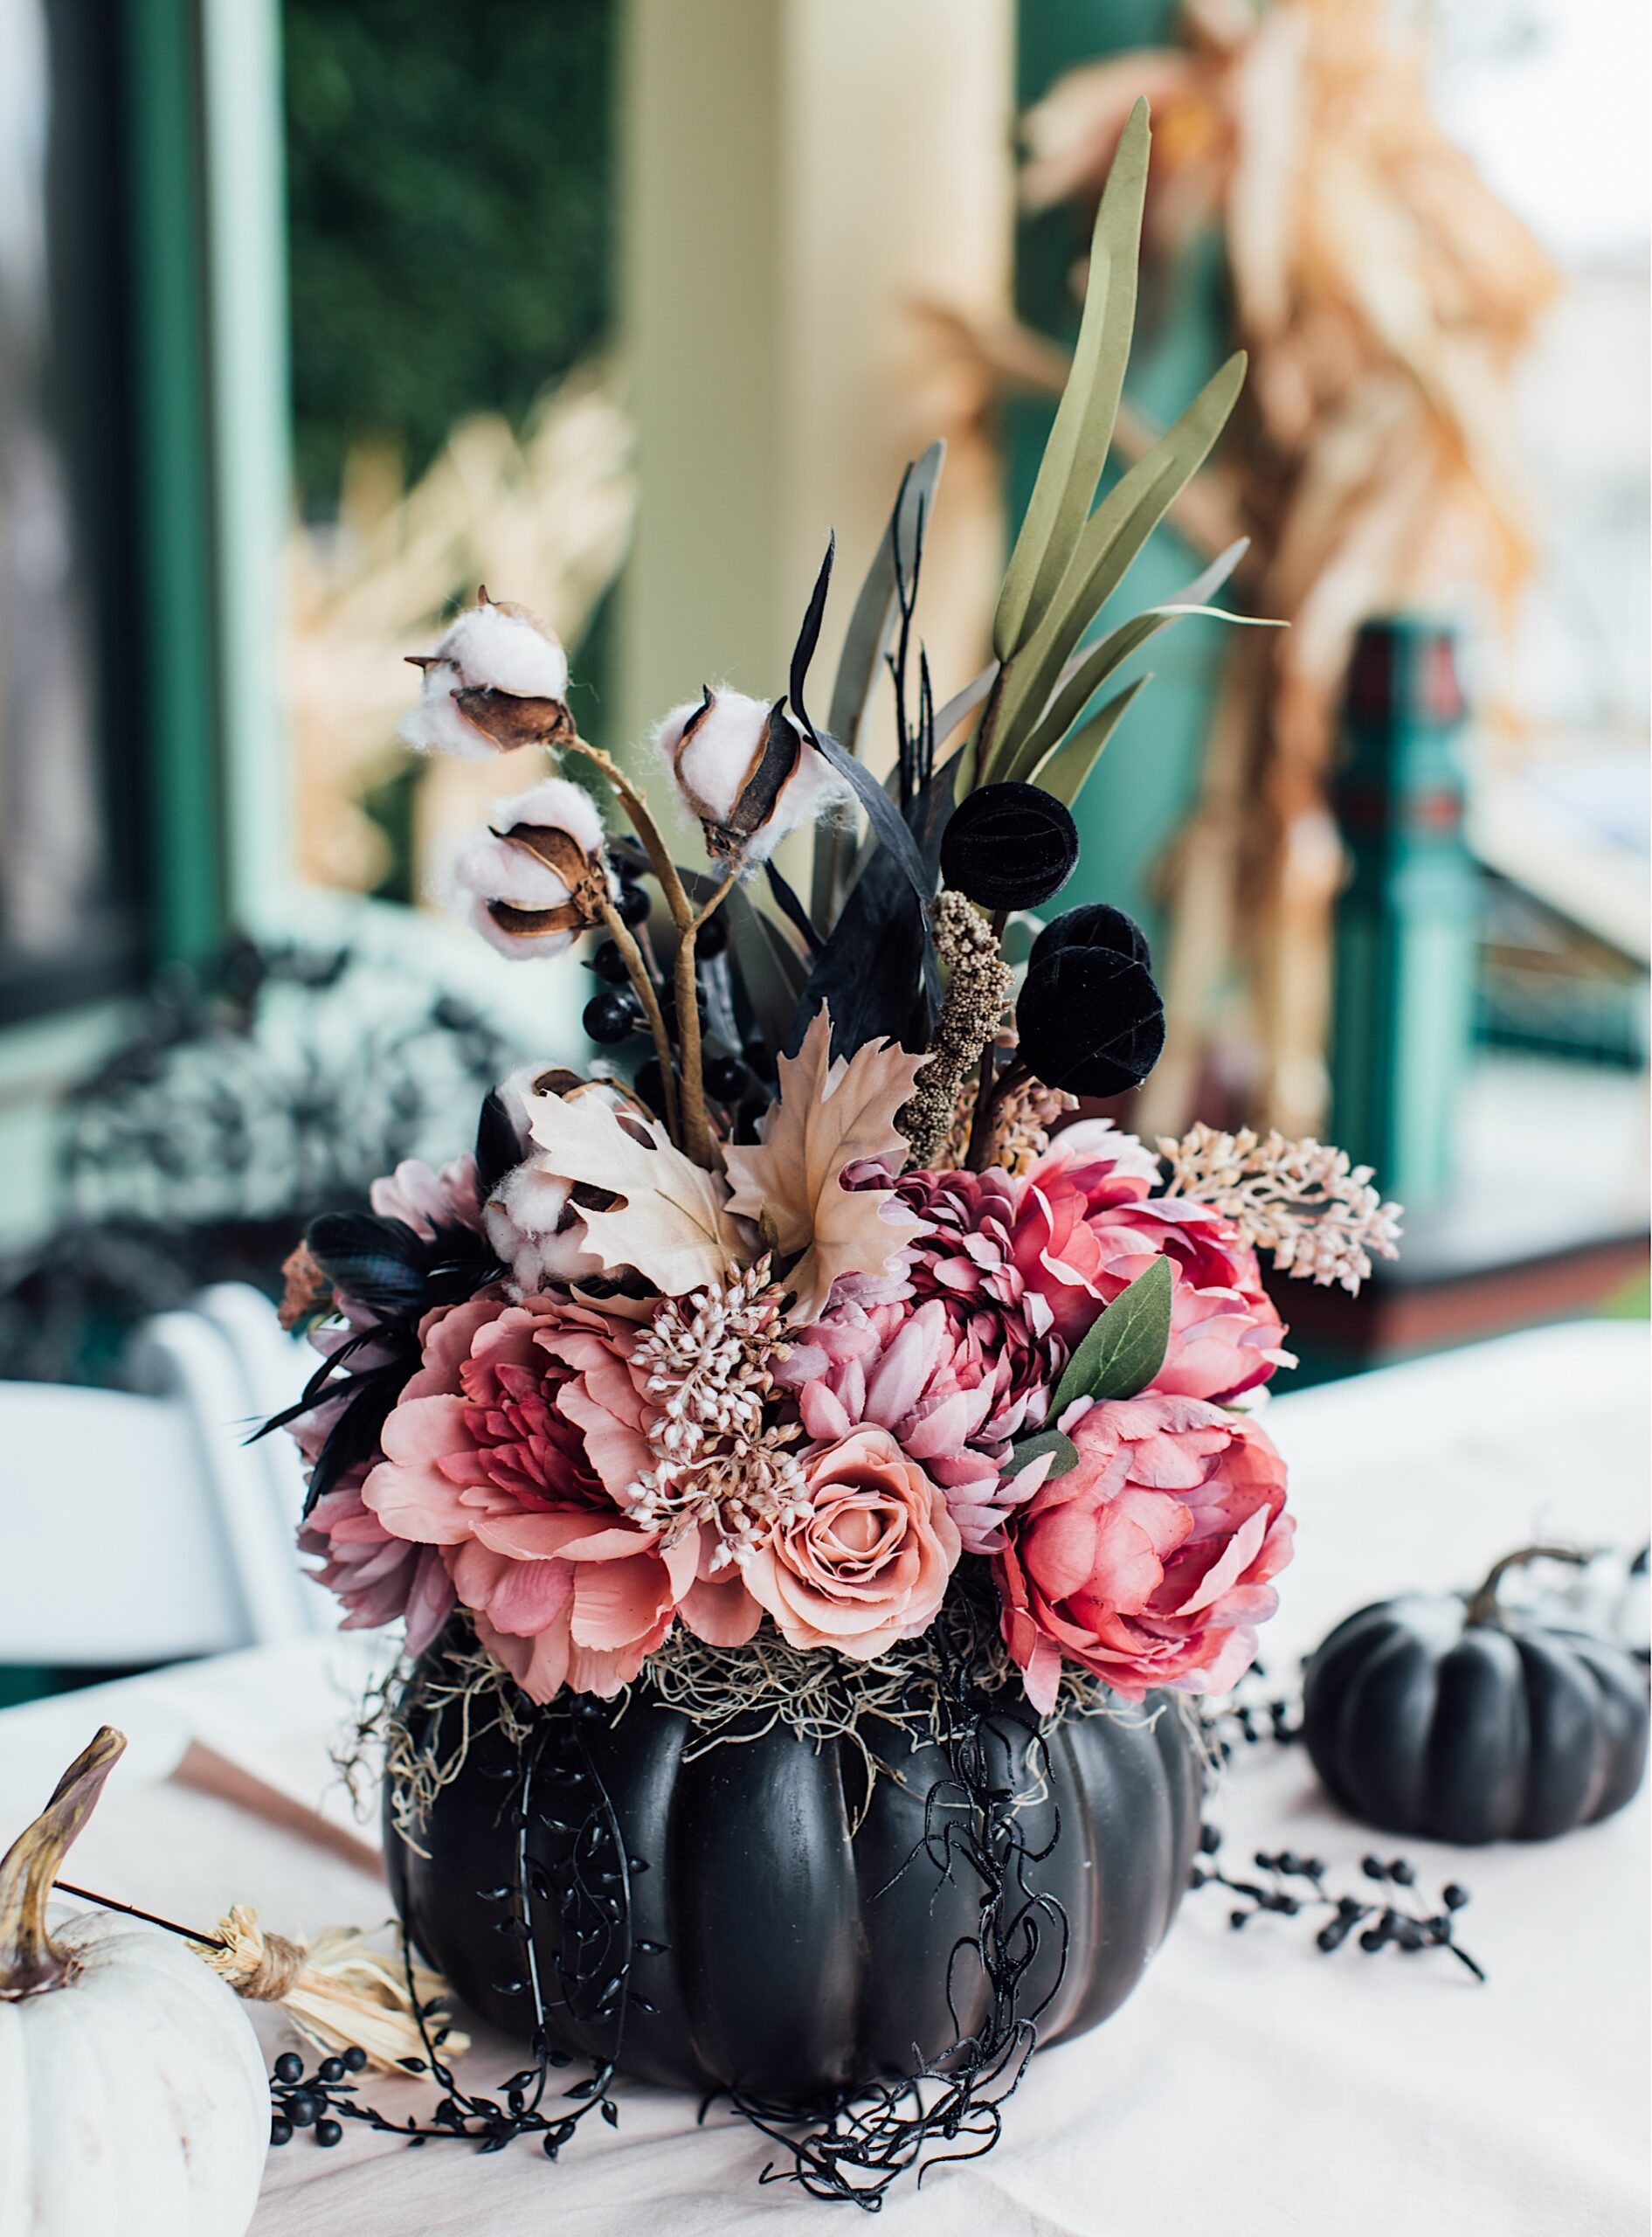 florals stuffed into black pumpkins as witch bridal shower decor outside of victorian haunted mansion by photographer Jessica Sofranko